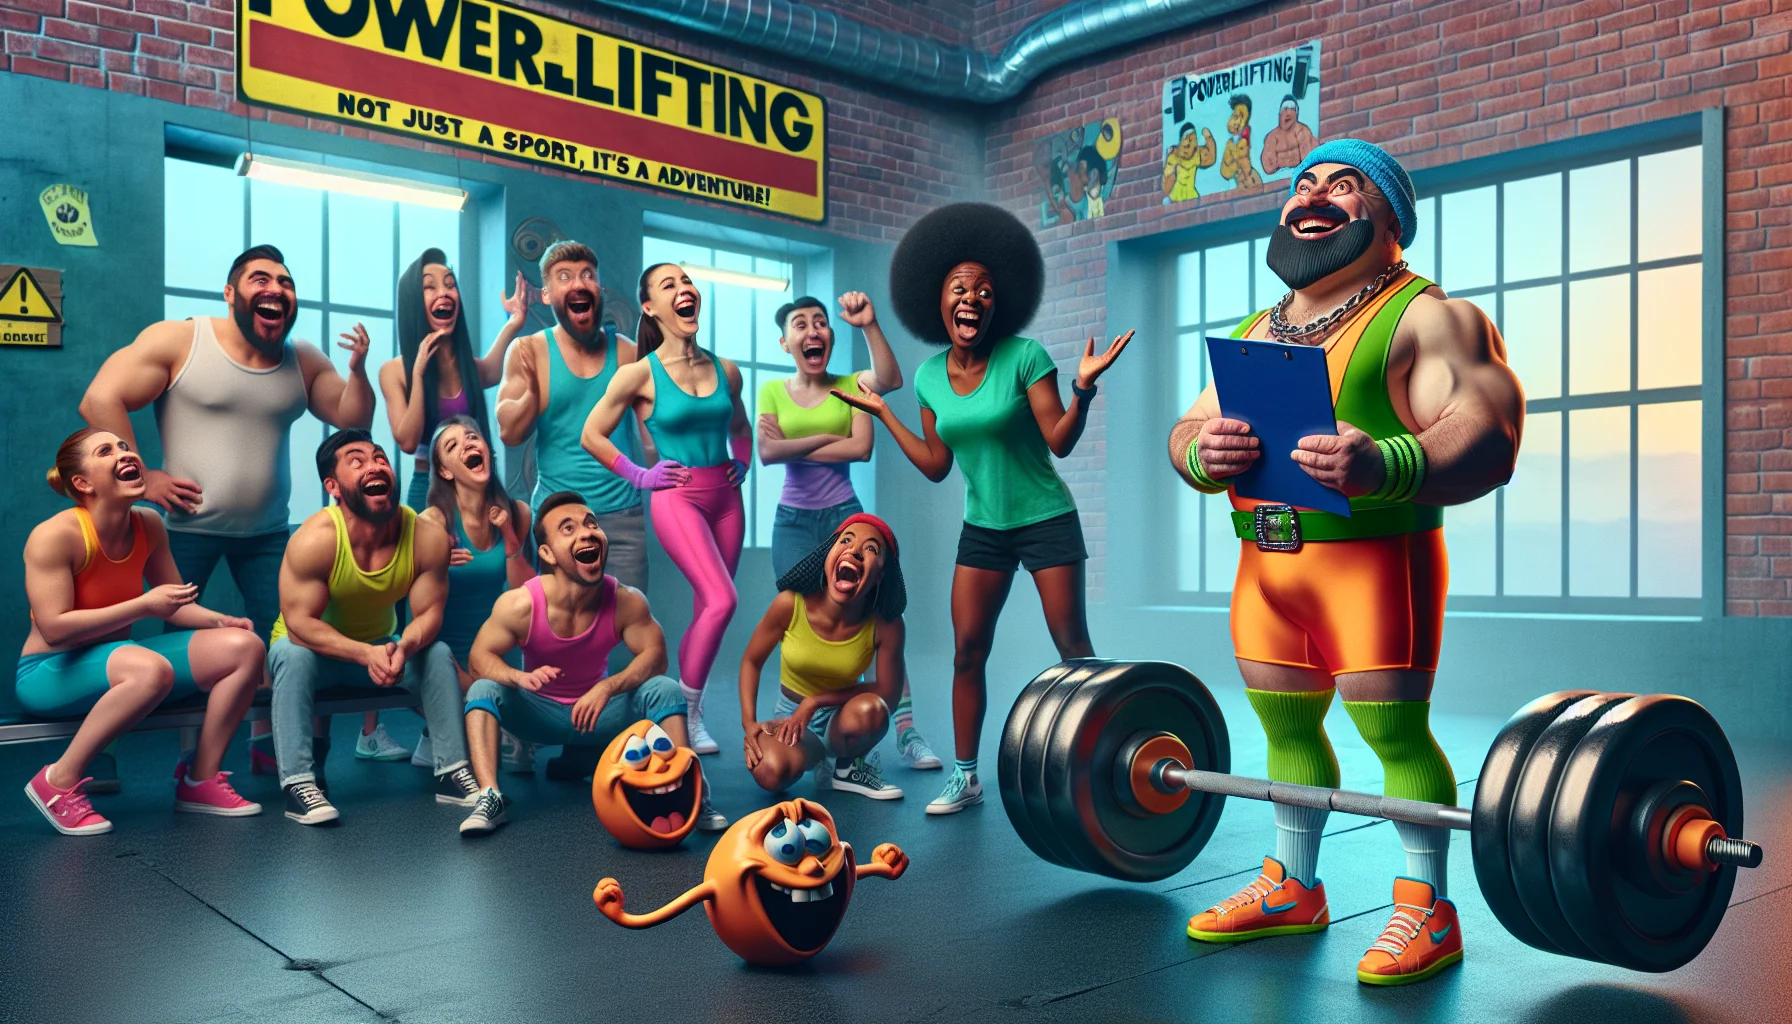 Create an imaginative and humorous depiction of a powerlifting scenario. Scene includes a middle-aged Hispanic man in neon-colored gym attire, impromptly lifting what seems to be an oversized, comically designed dumbbell with cartoonish weights. Behind him, a young Black female coach with a hilarious, exaggerated expression of awe stands, clipboard in hand. On the sides, a multicultural group of observers laughing and cheering have amusing reactions. The slogan 'Powerlifting: Not Just a Sport, It's an Adventure!' is written creatively on the gym wall. The image evokes a sense of fun, inviting everyone to exercise.